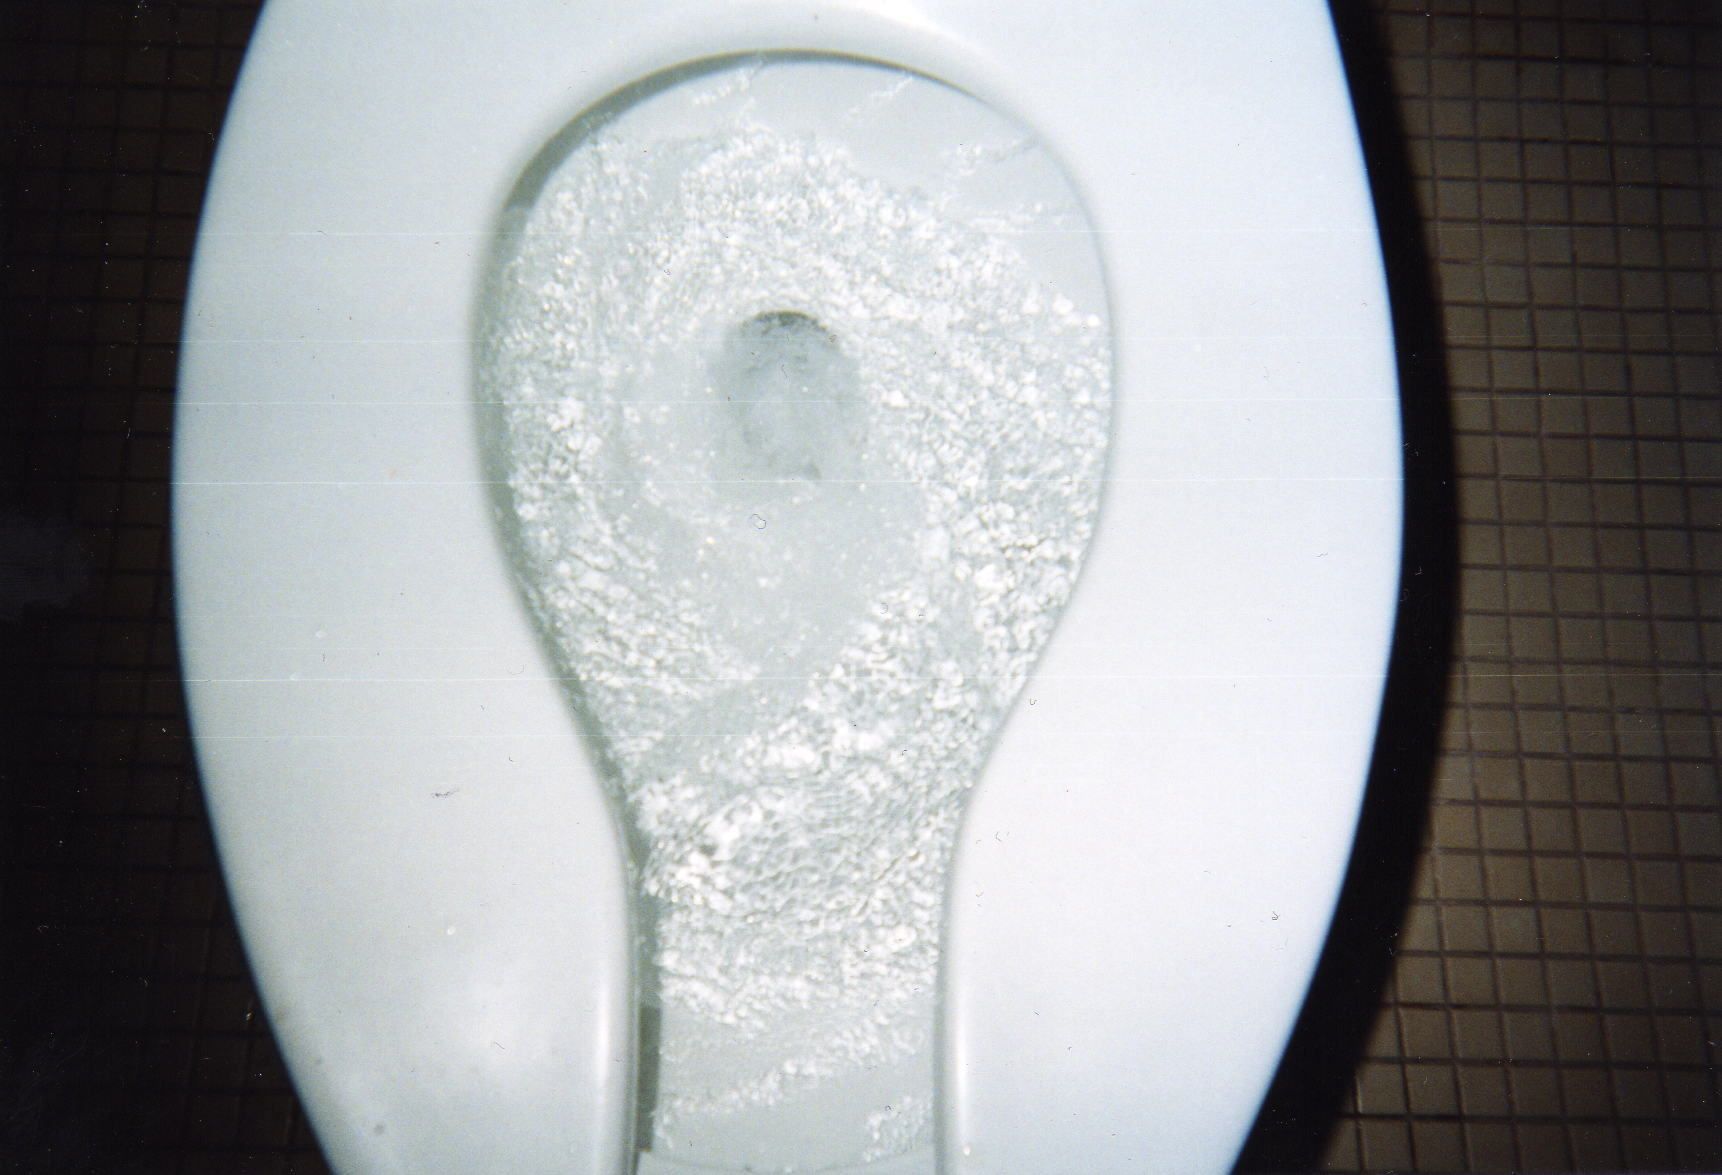 Add a cup of baking soda to the toilet, leave it for an hour, and then flush.  I